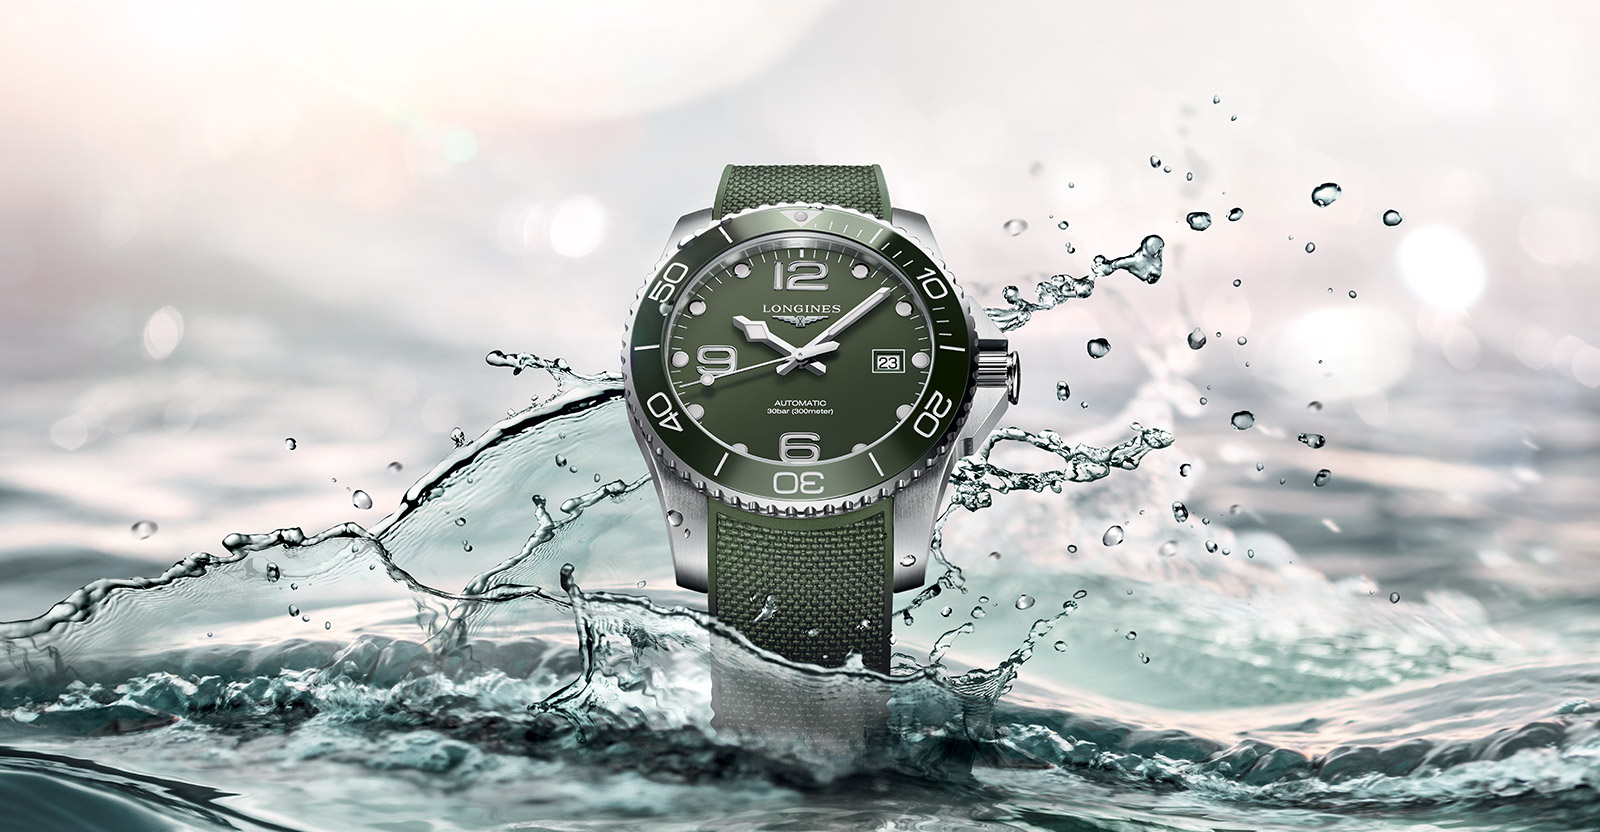 The HydroConquest Collection by Longines